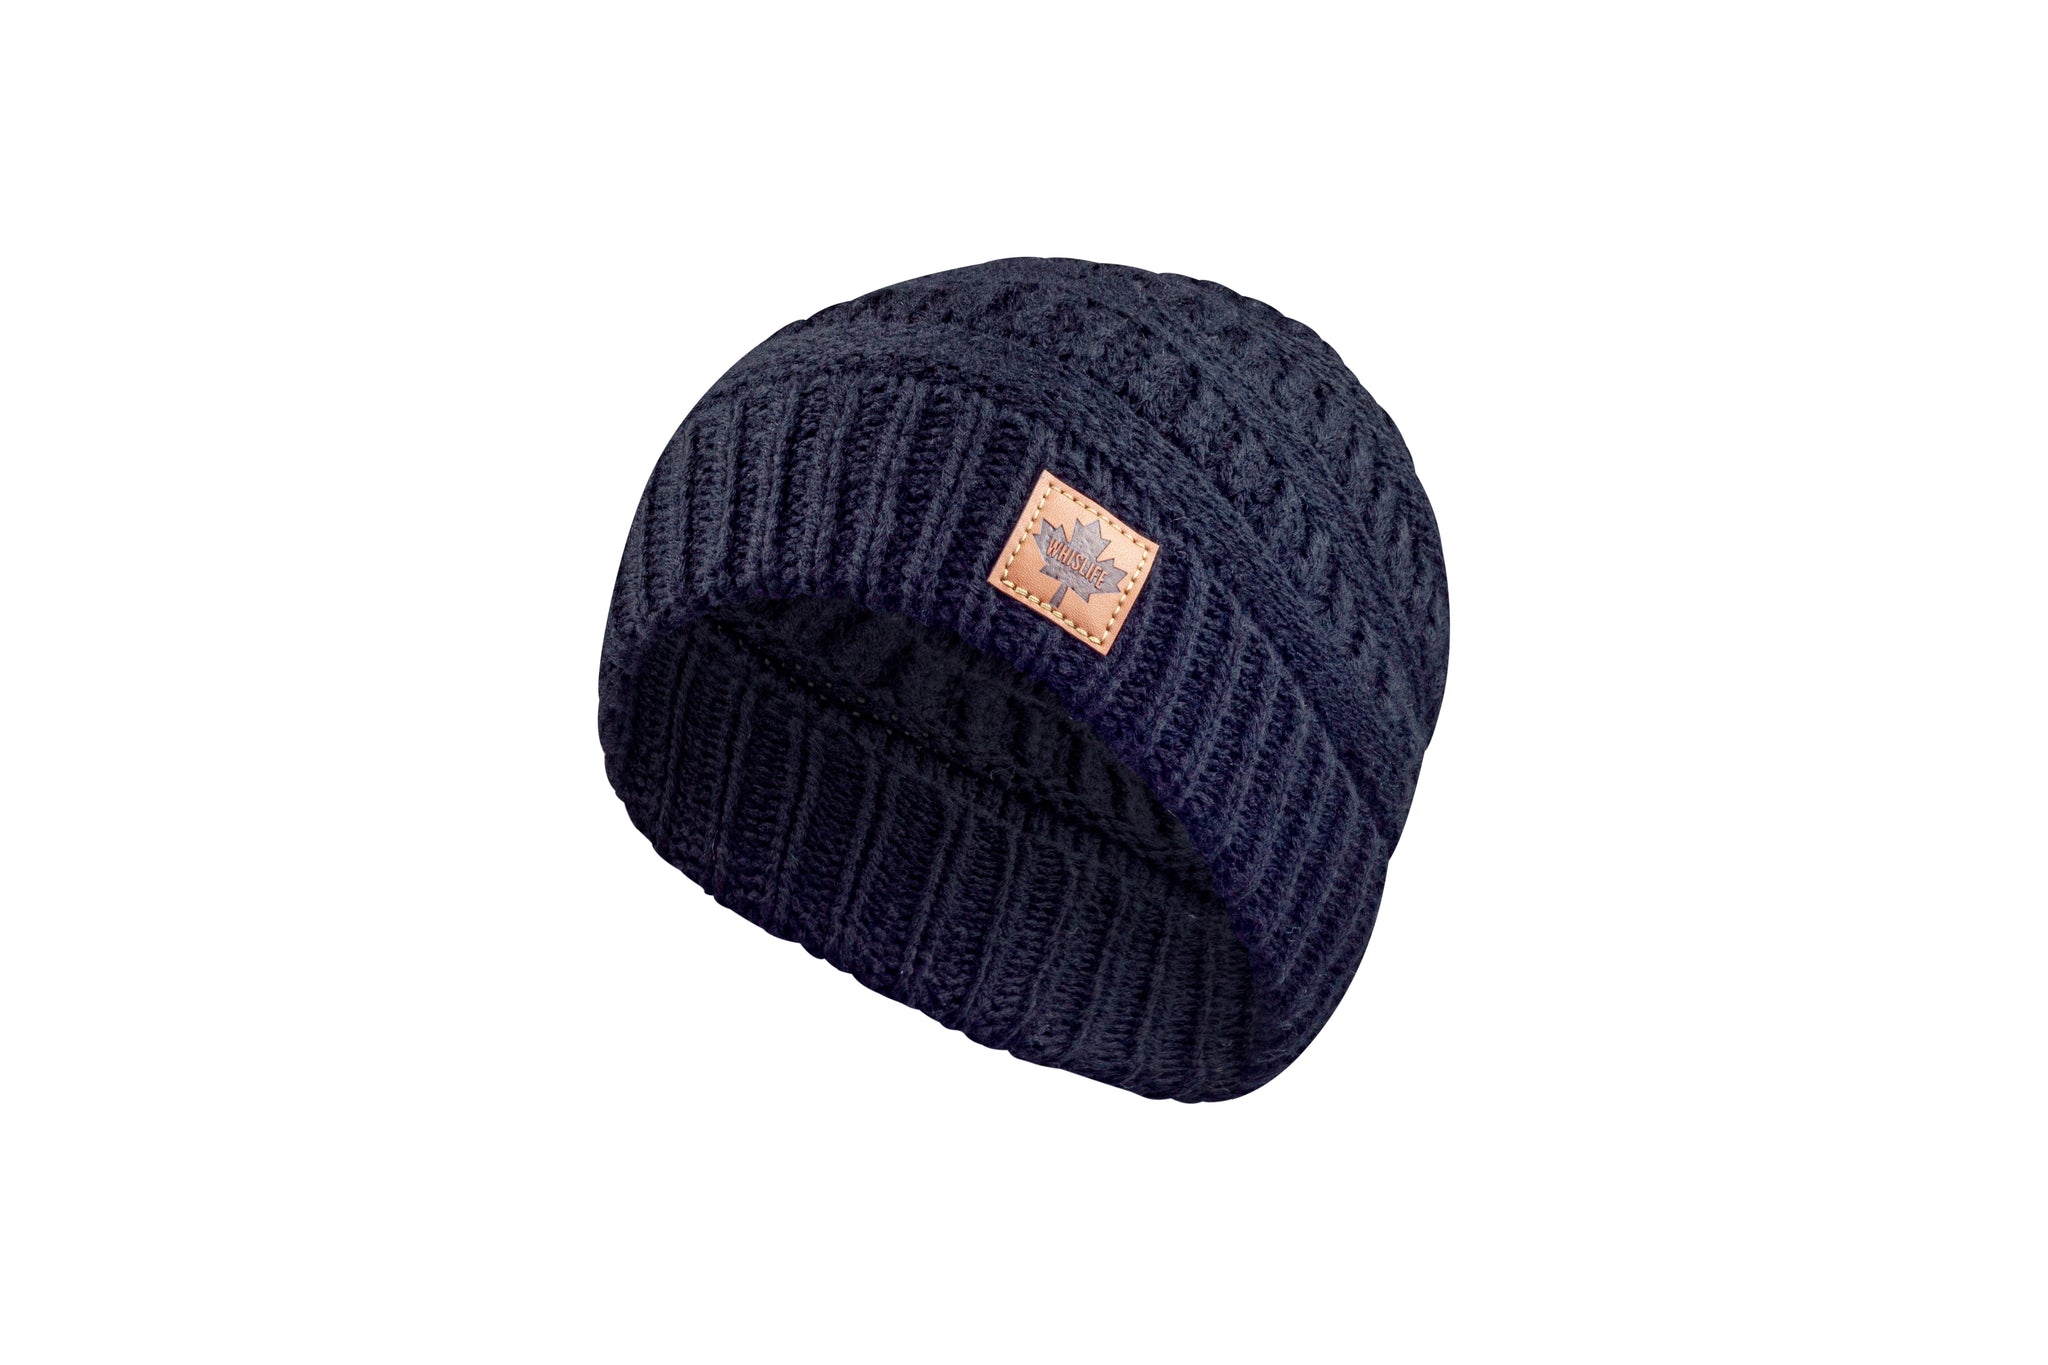 Youth Knitted Toque - Maple